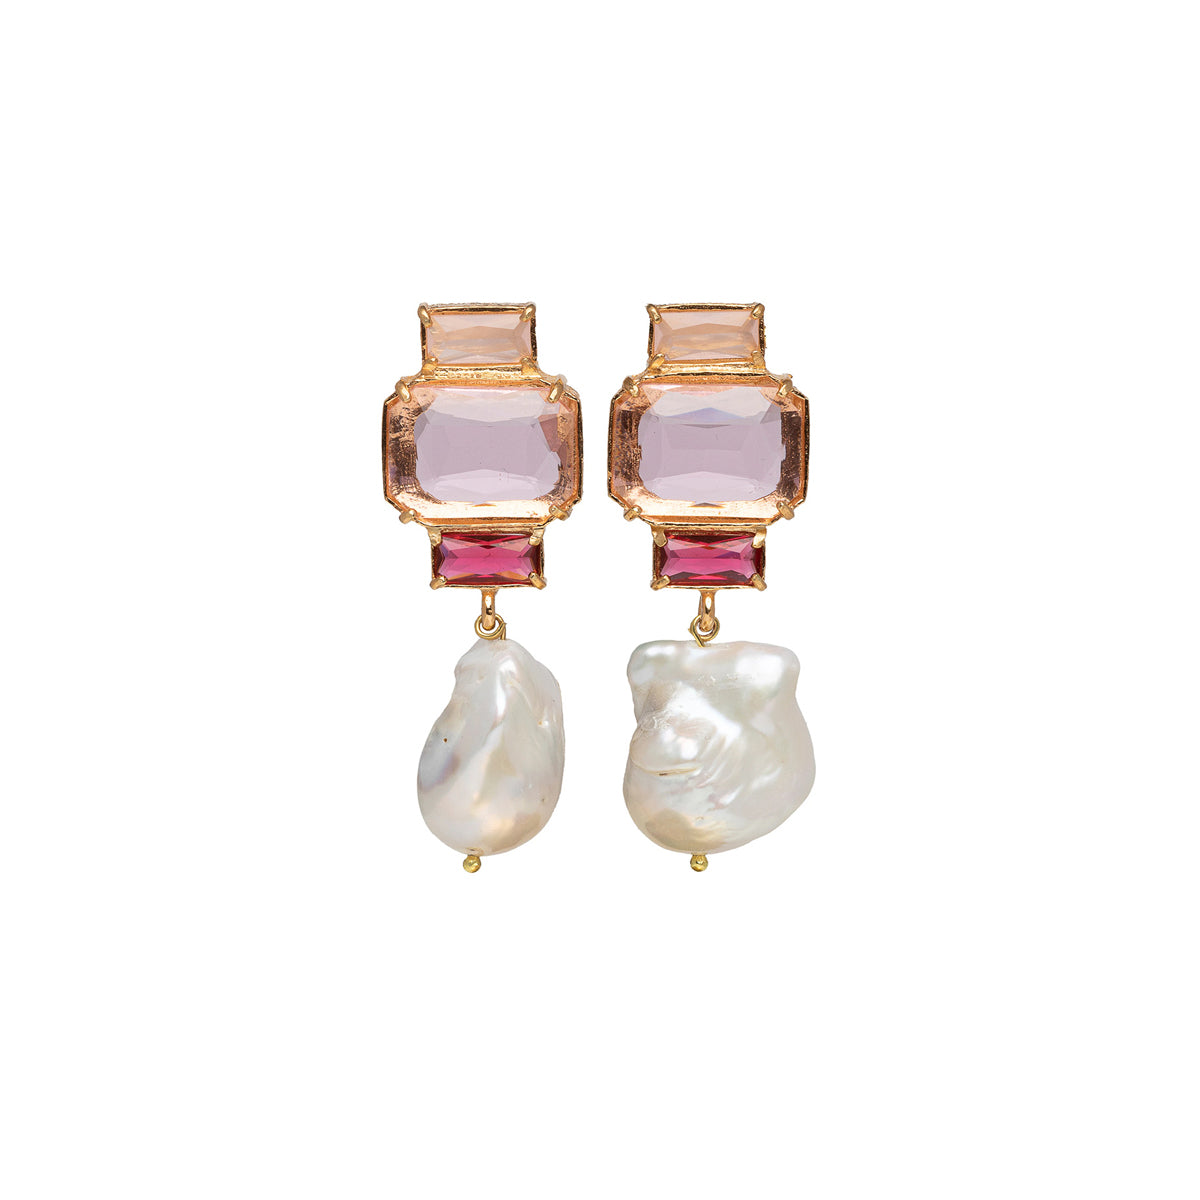 Shades of Pink Crystals with a Pearl Drop. Gold tone.